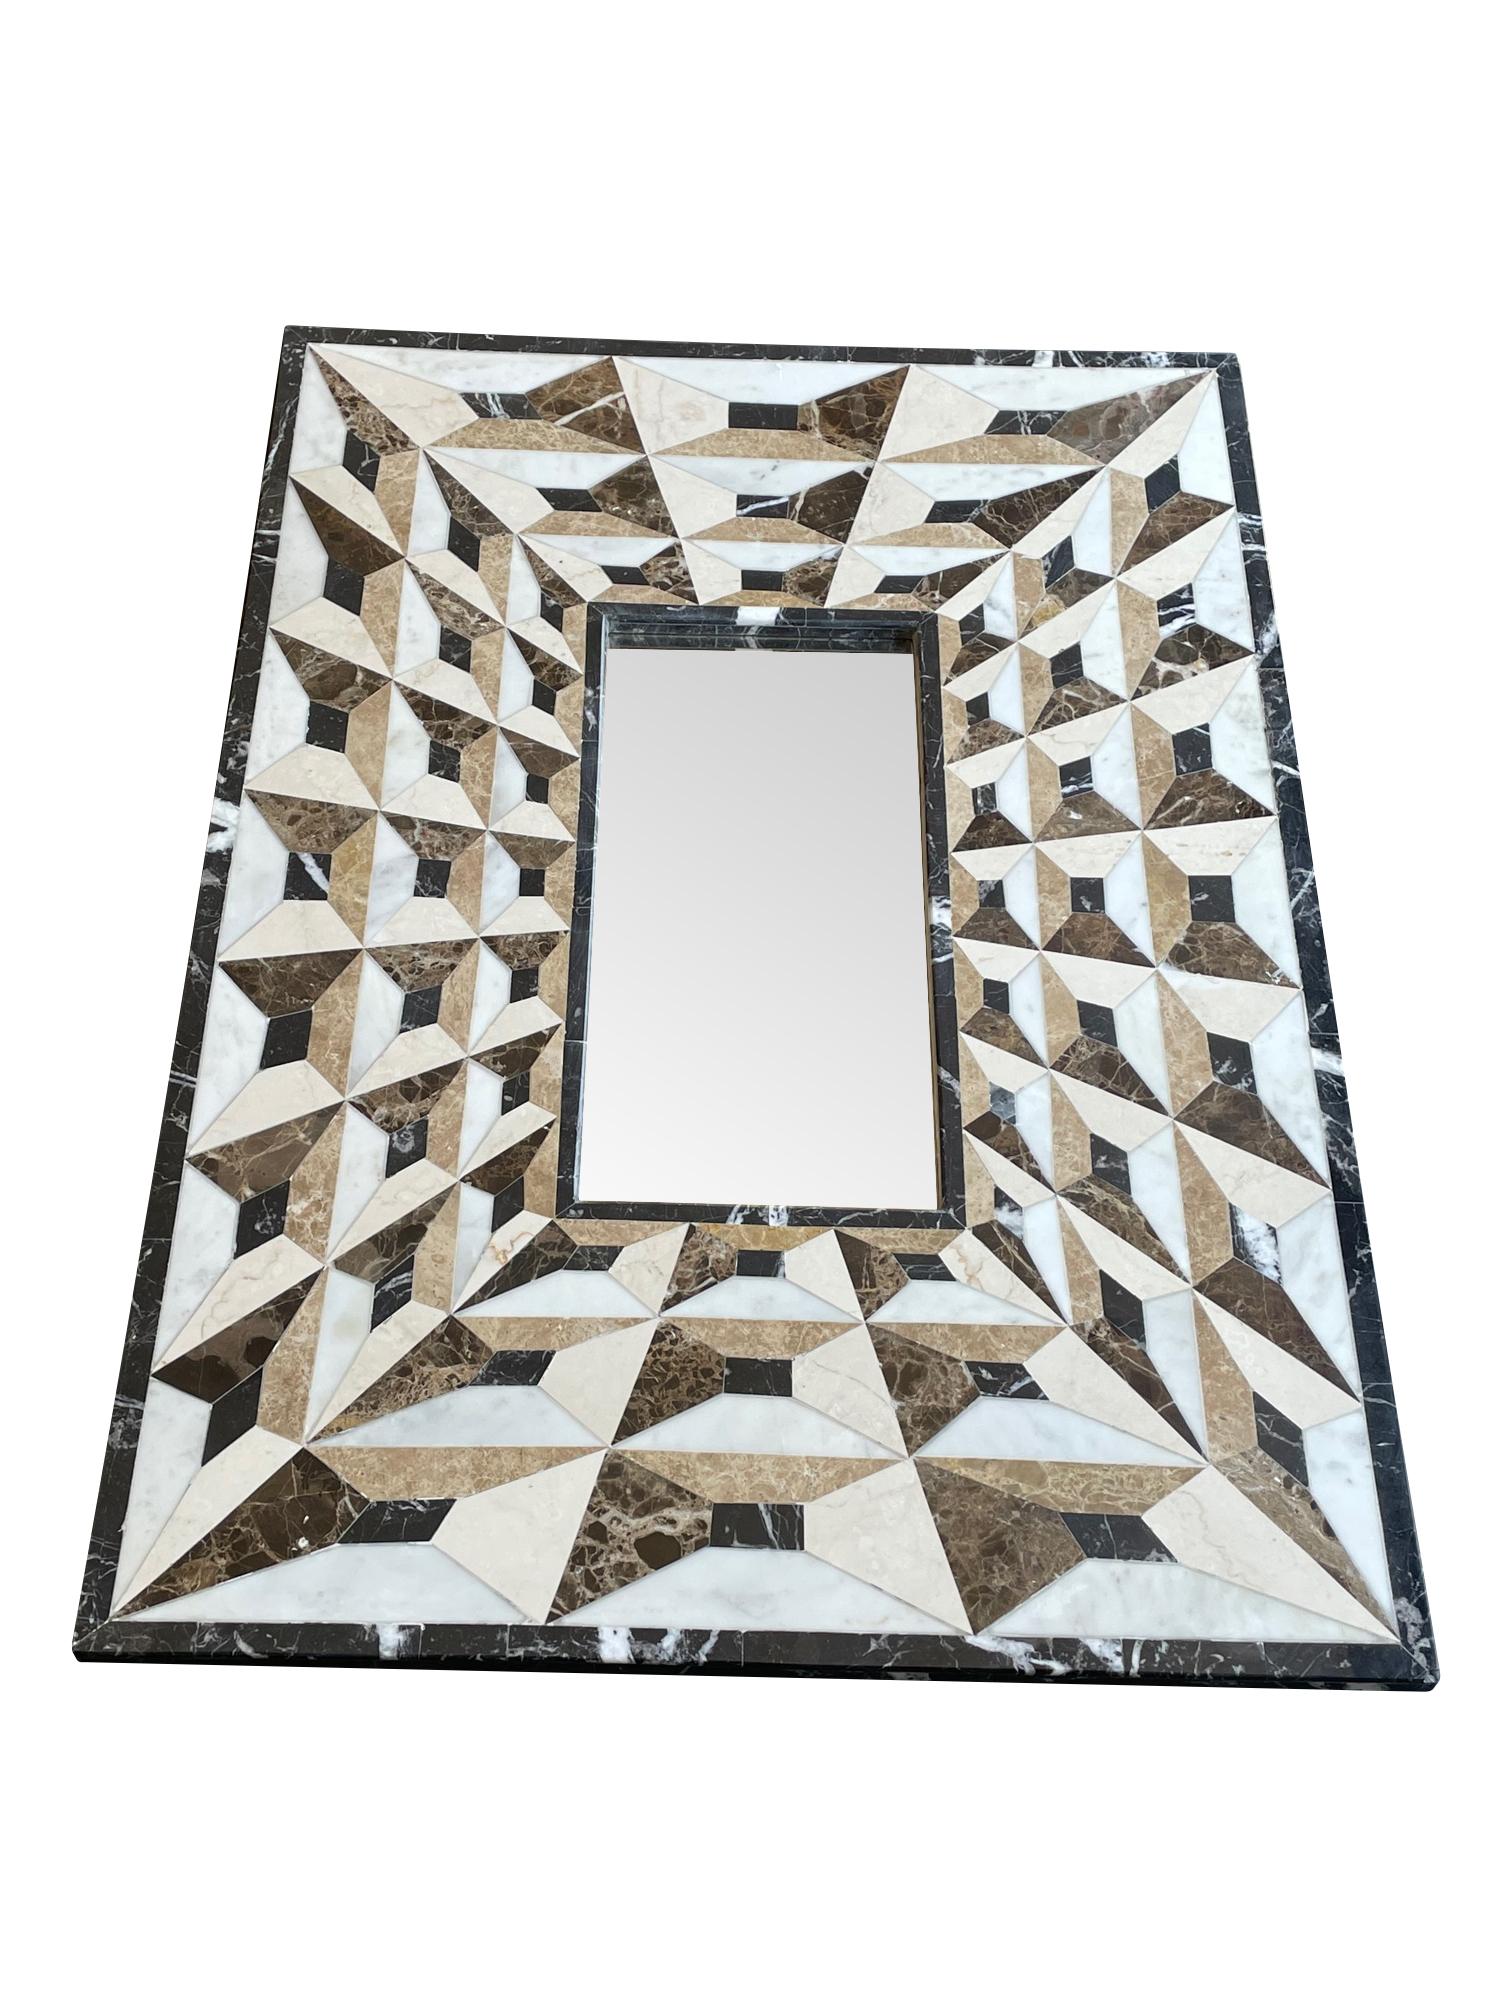 Art Deco Mirror with Tessellated Marble Surround Creating Optical Perspective 1